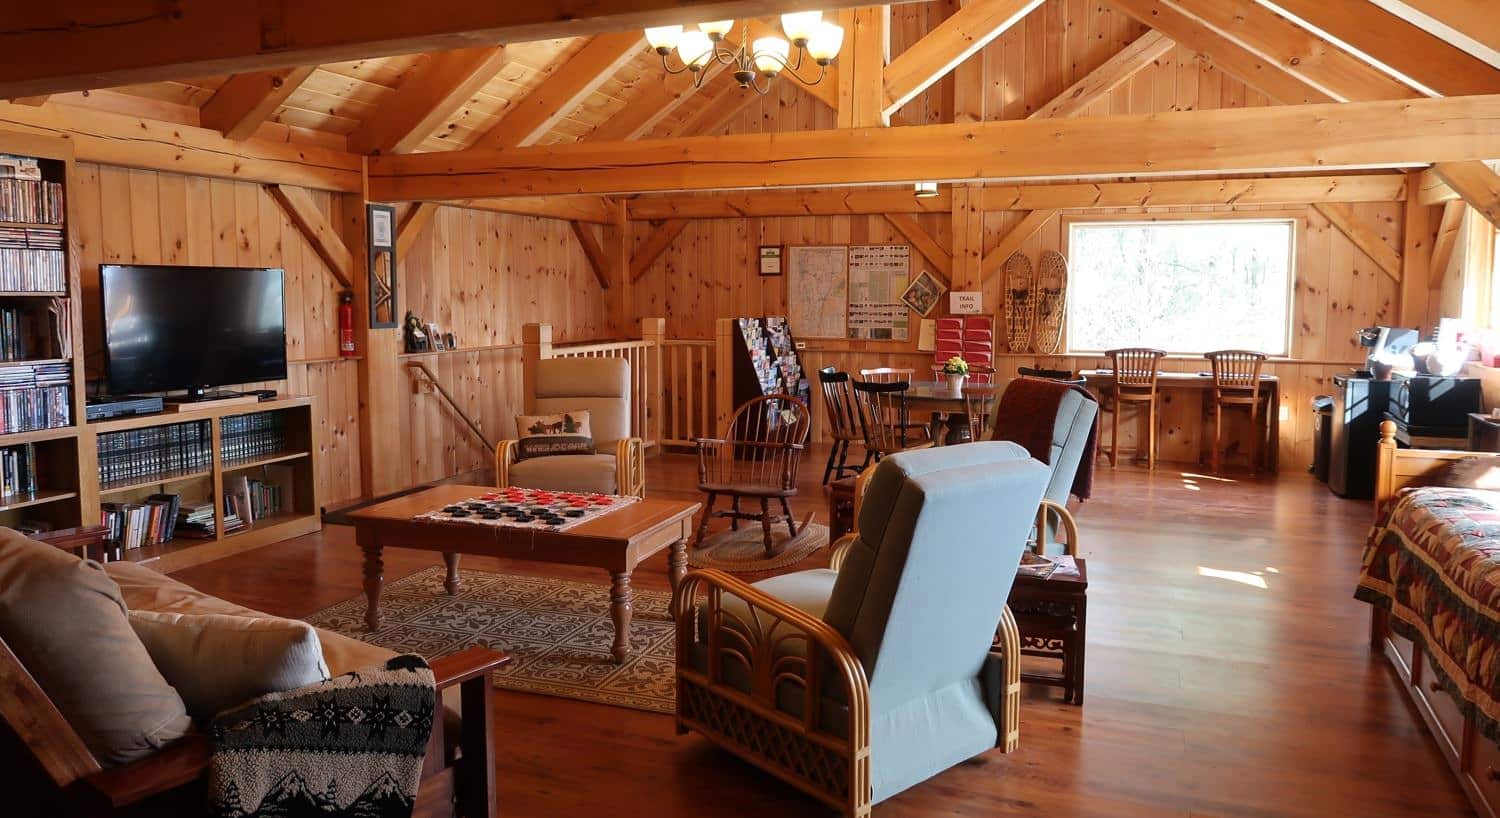 Inside the wooden community cabin with furniture, TV, books, games, dining tables and chairs and bar seating under the window